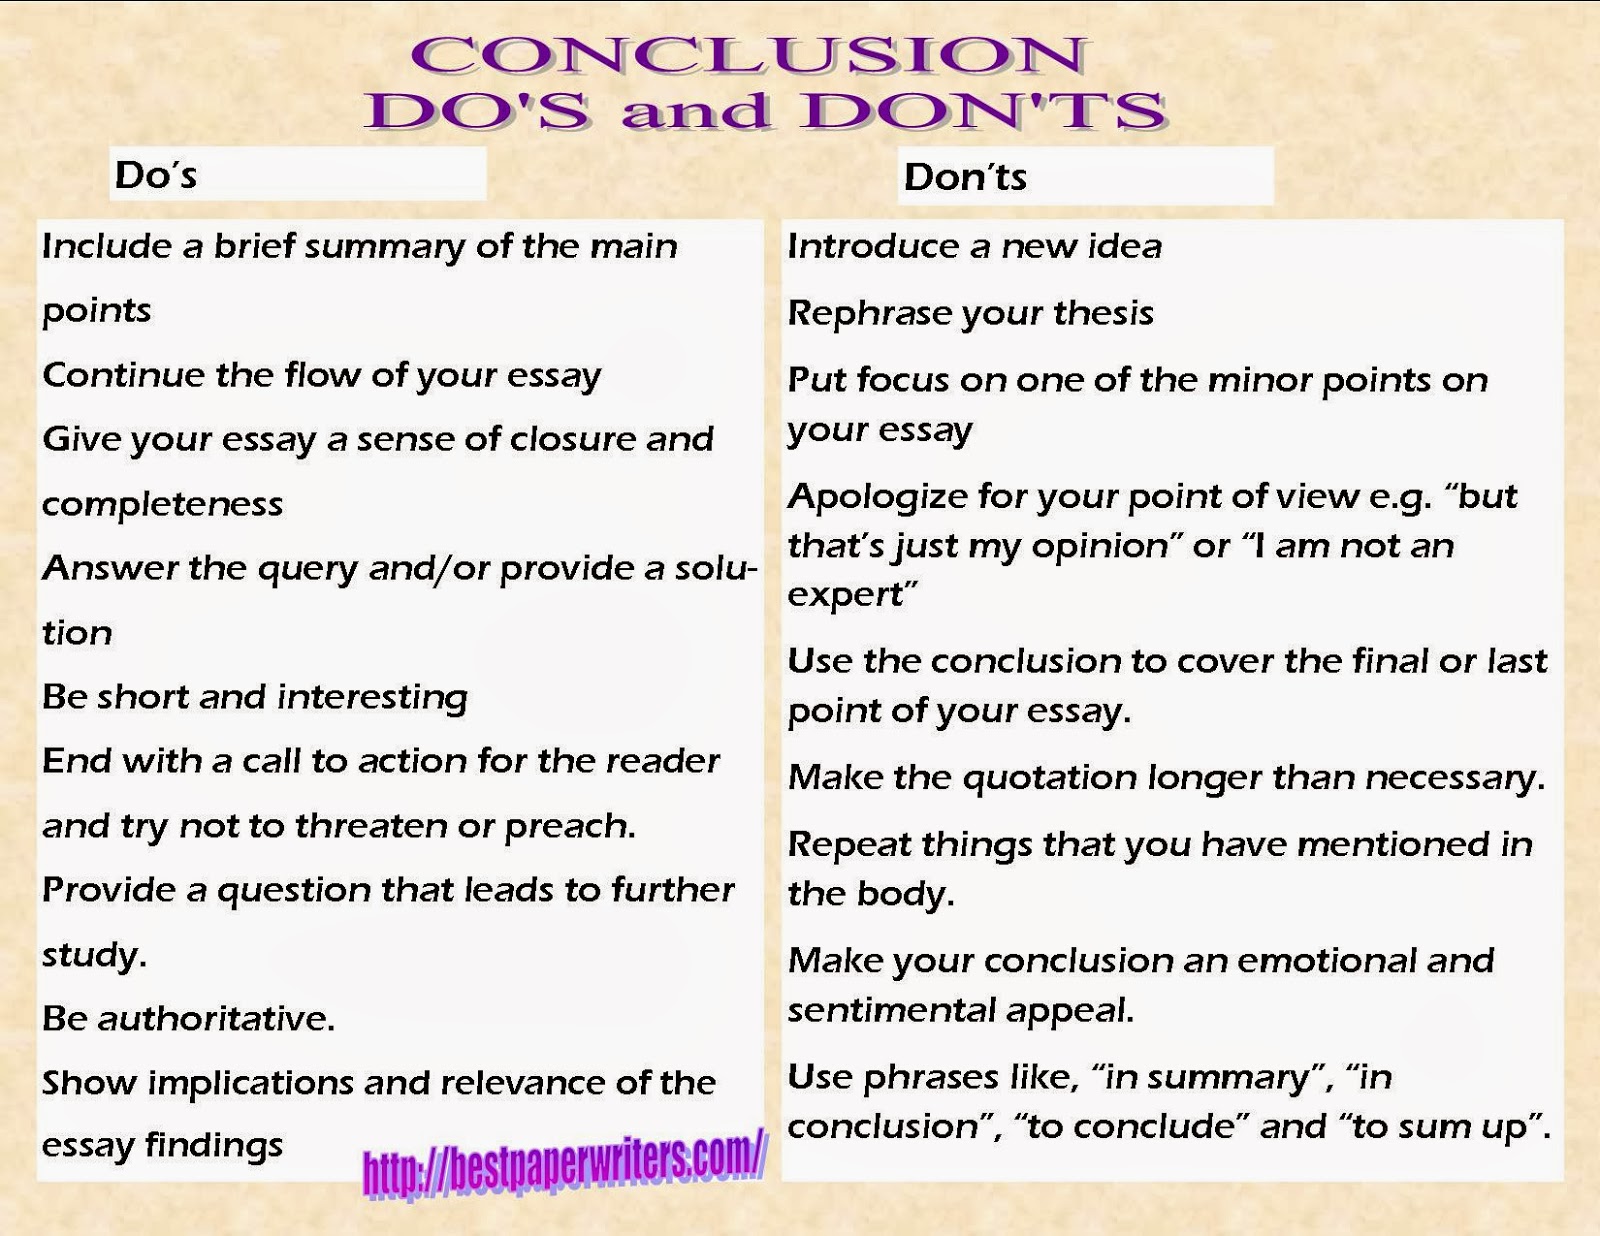 What is an Essay Conclusion